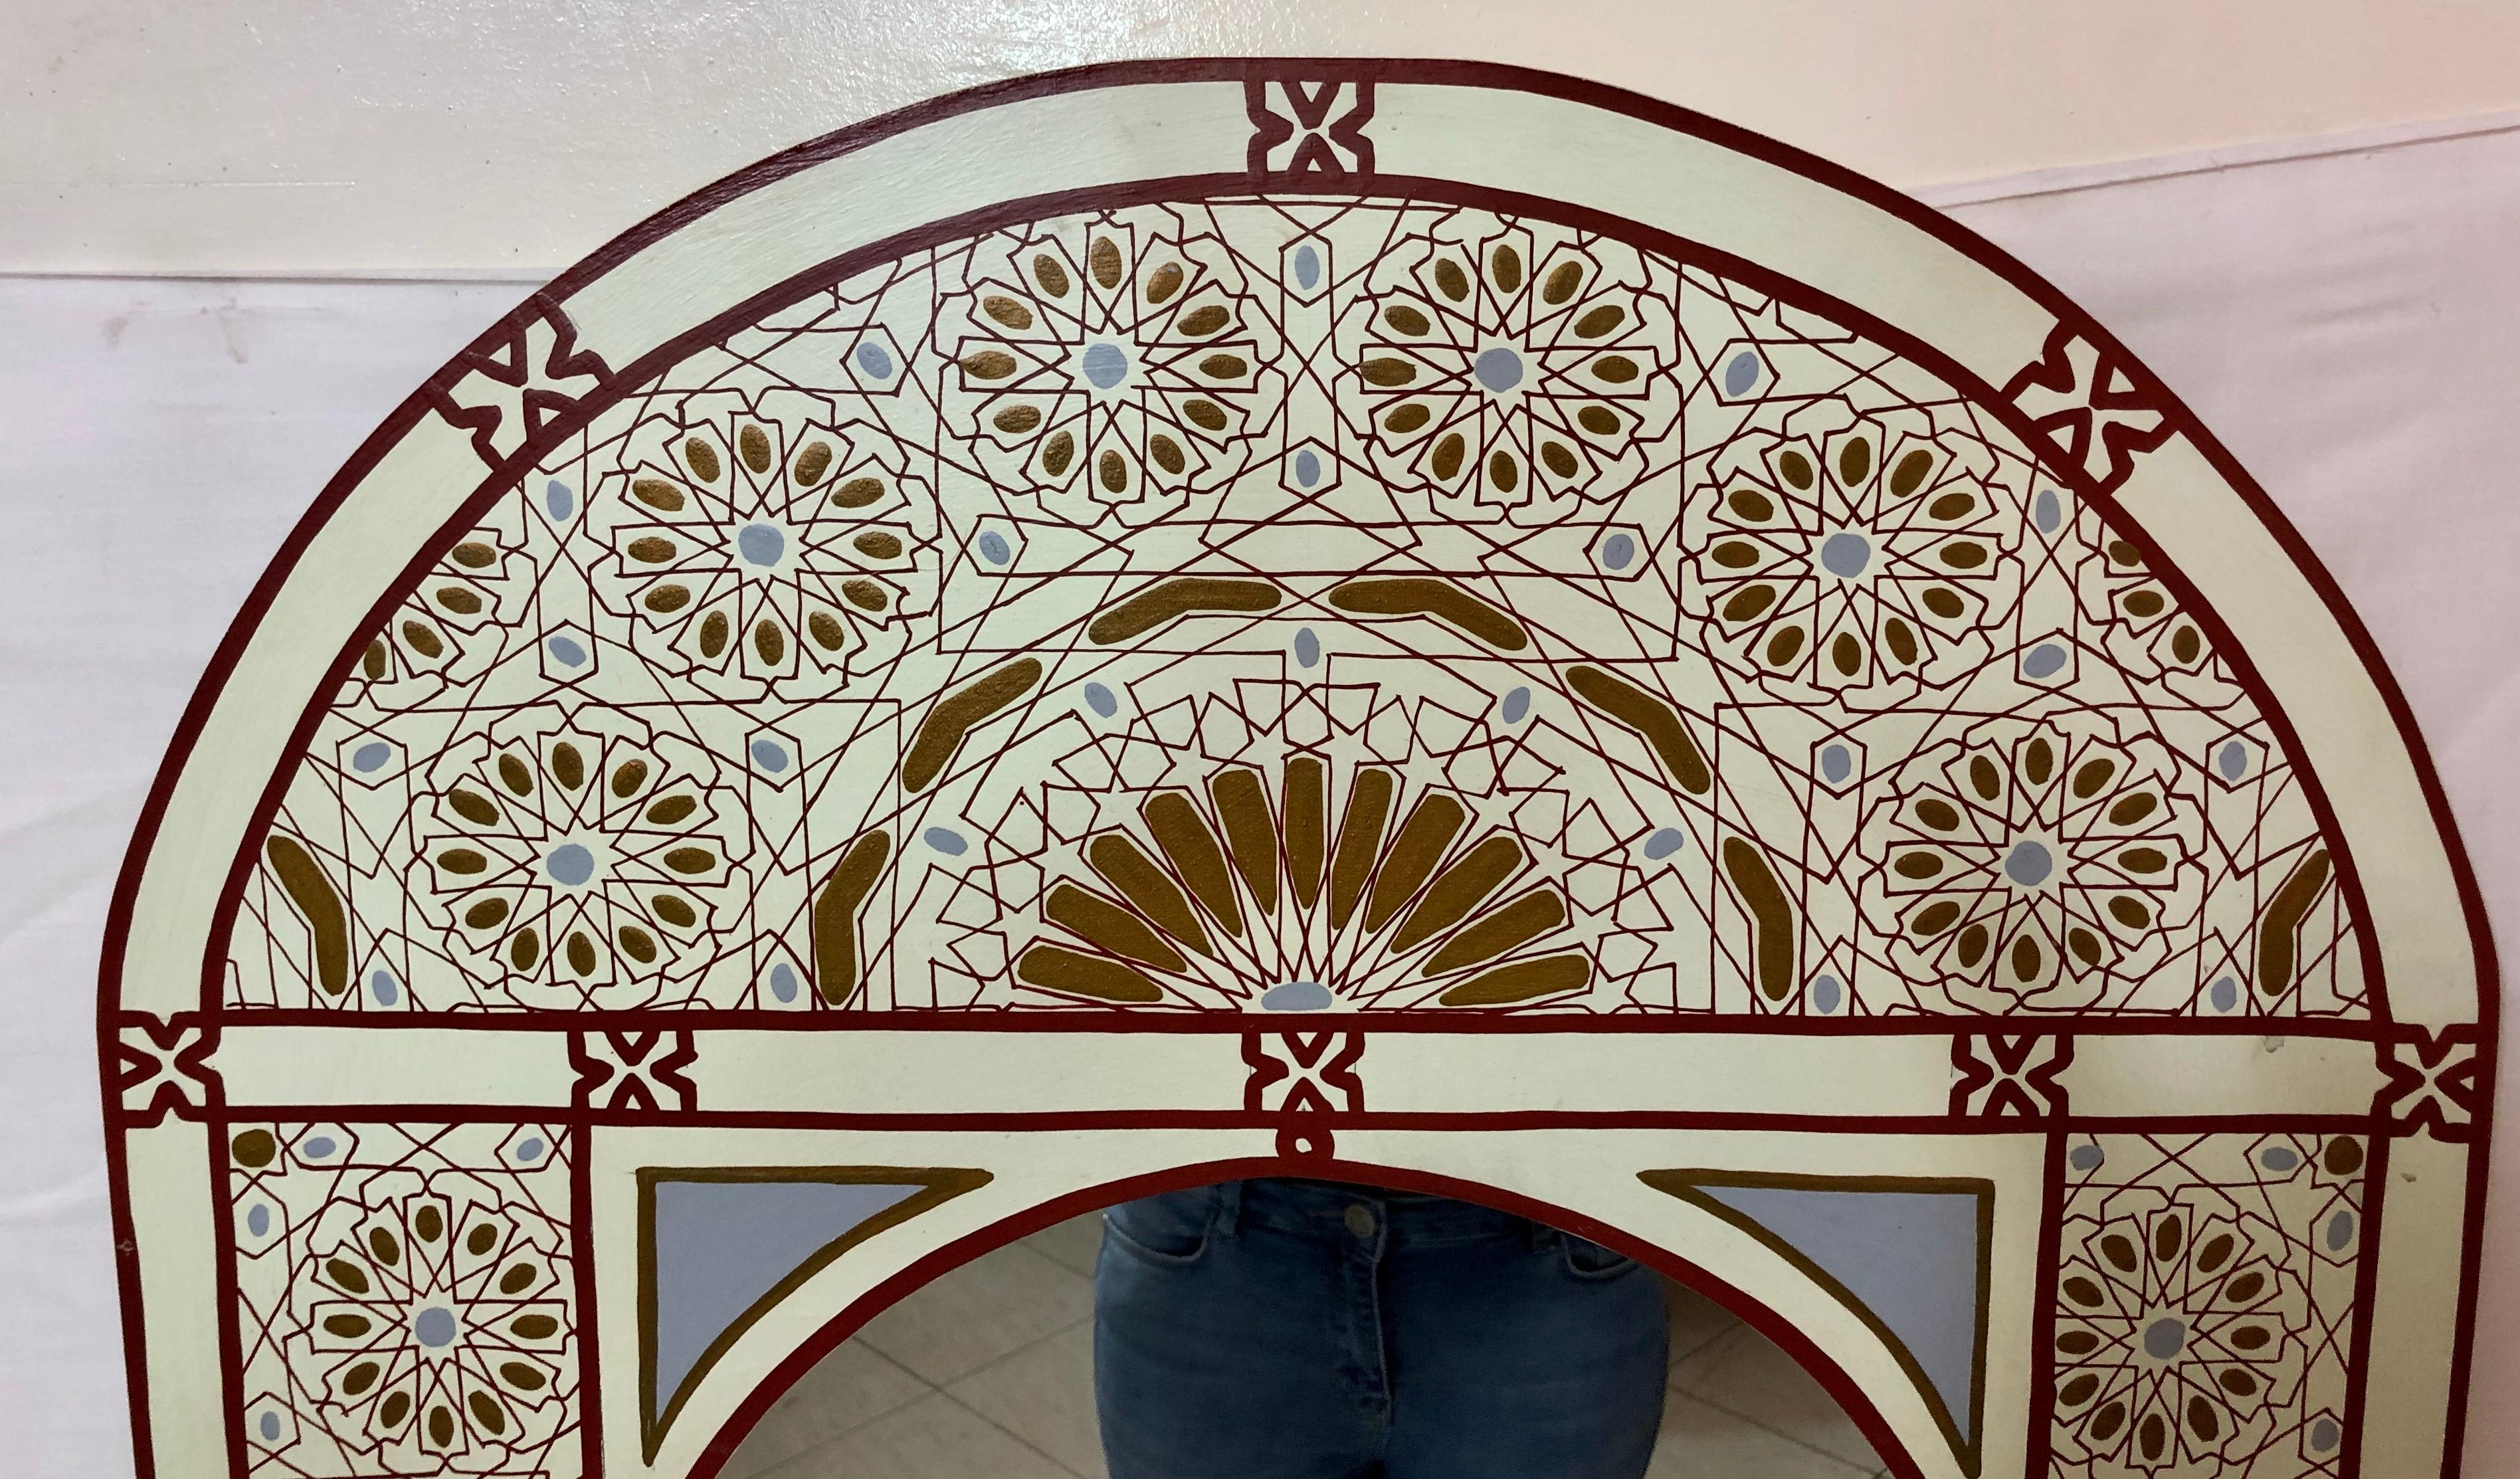 A chic and exquisite vintage hand painted Moroccan wall, console or vanity mirror. The mirror features fine Moorish geometrical design in burgundy, gold and blue gray on white.